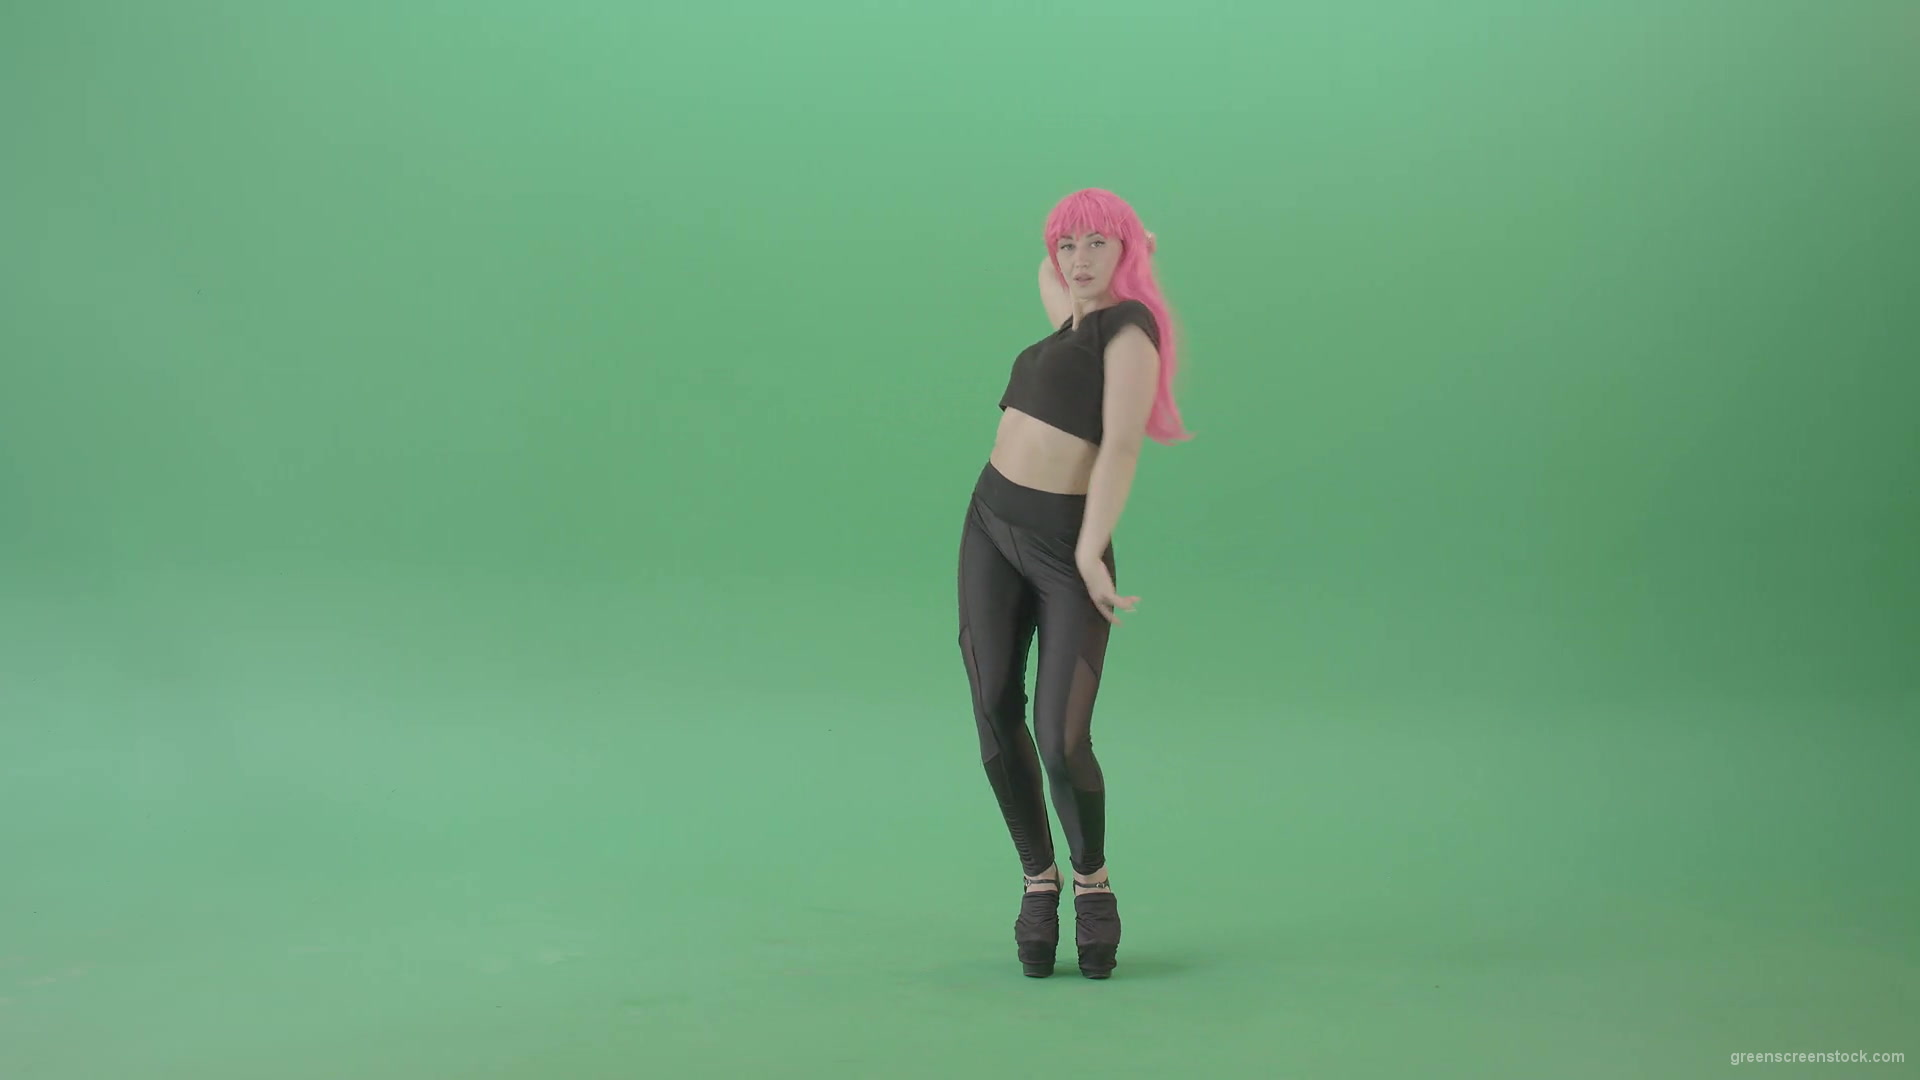 Pink-hair-EMO-sexy-girl-on-green-screen-posing-and-dancing-4K-Video-Footage-1920_002 Green Screen Stock